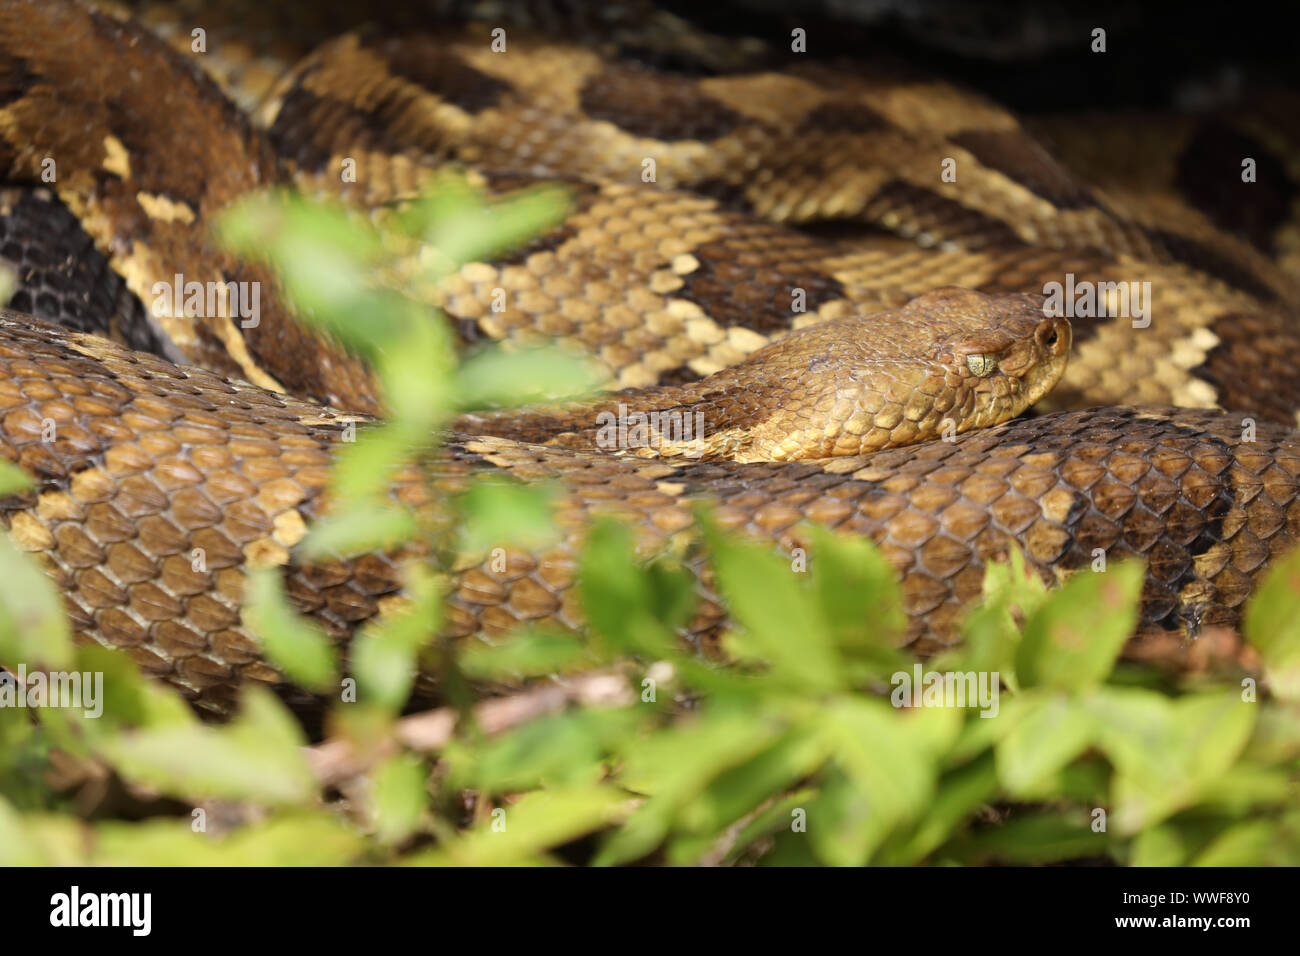 timber rattlesnake, (Crotalus horridus), adult female, Pennsylvania, gravid female timber rattlesnakes gather together at maternity sites and bask and Stock Photo